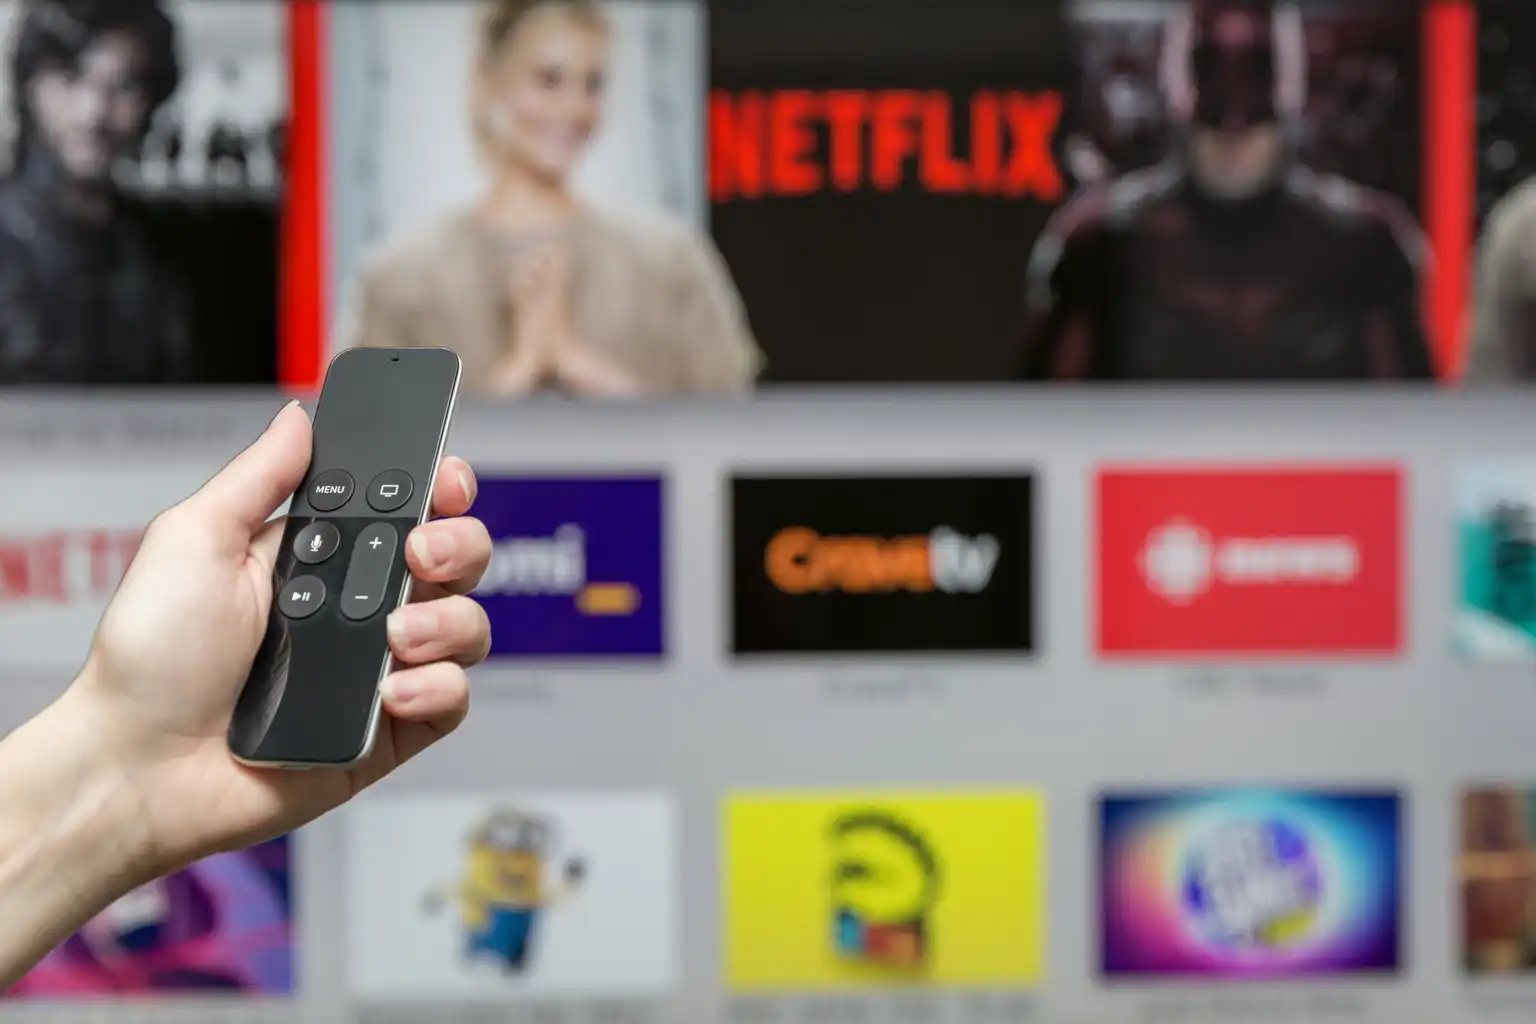 We Don't Need Subscriber Counts To Conclude That Netflix Is A Powerhouse - Seeking Alpha